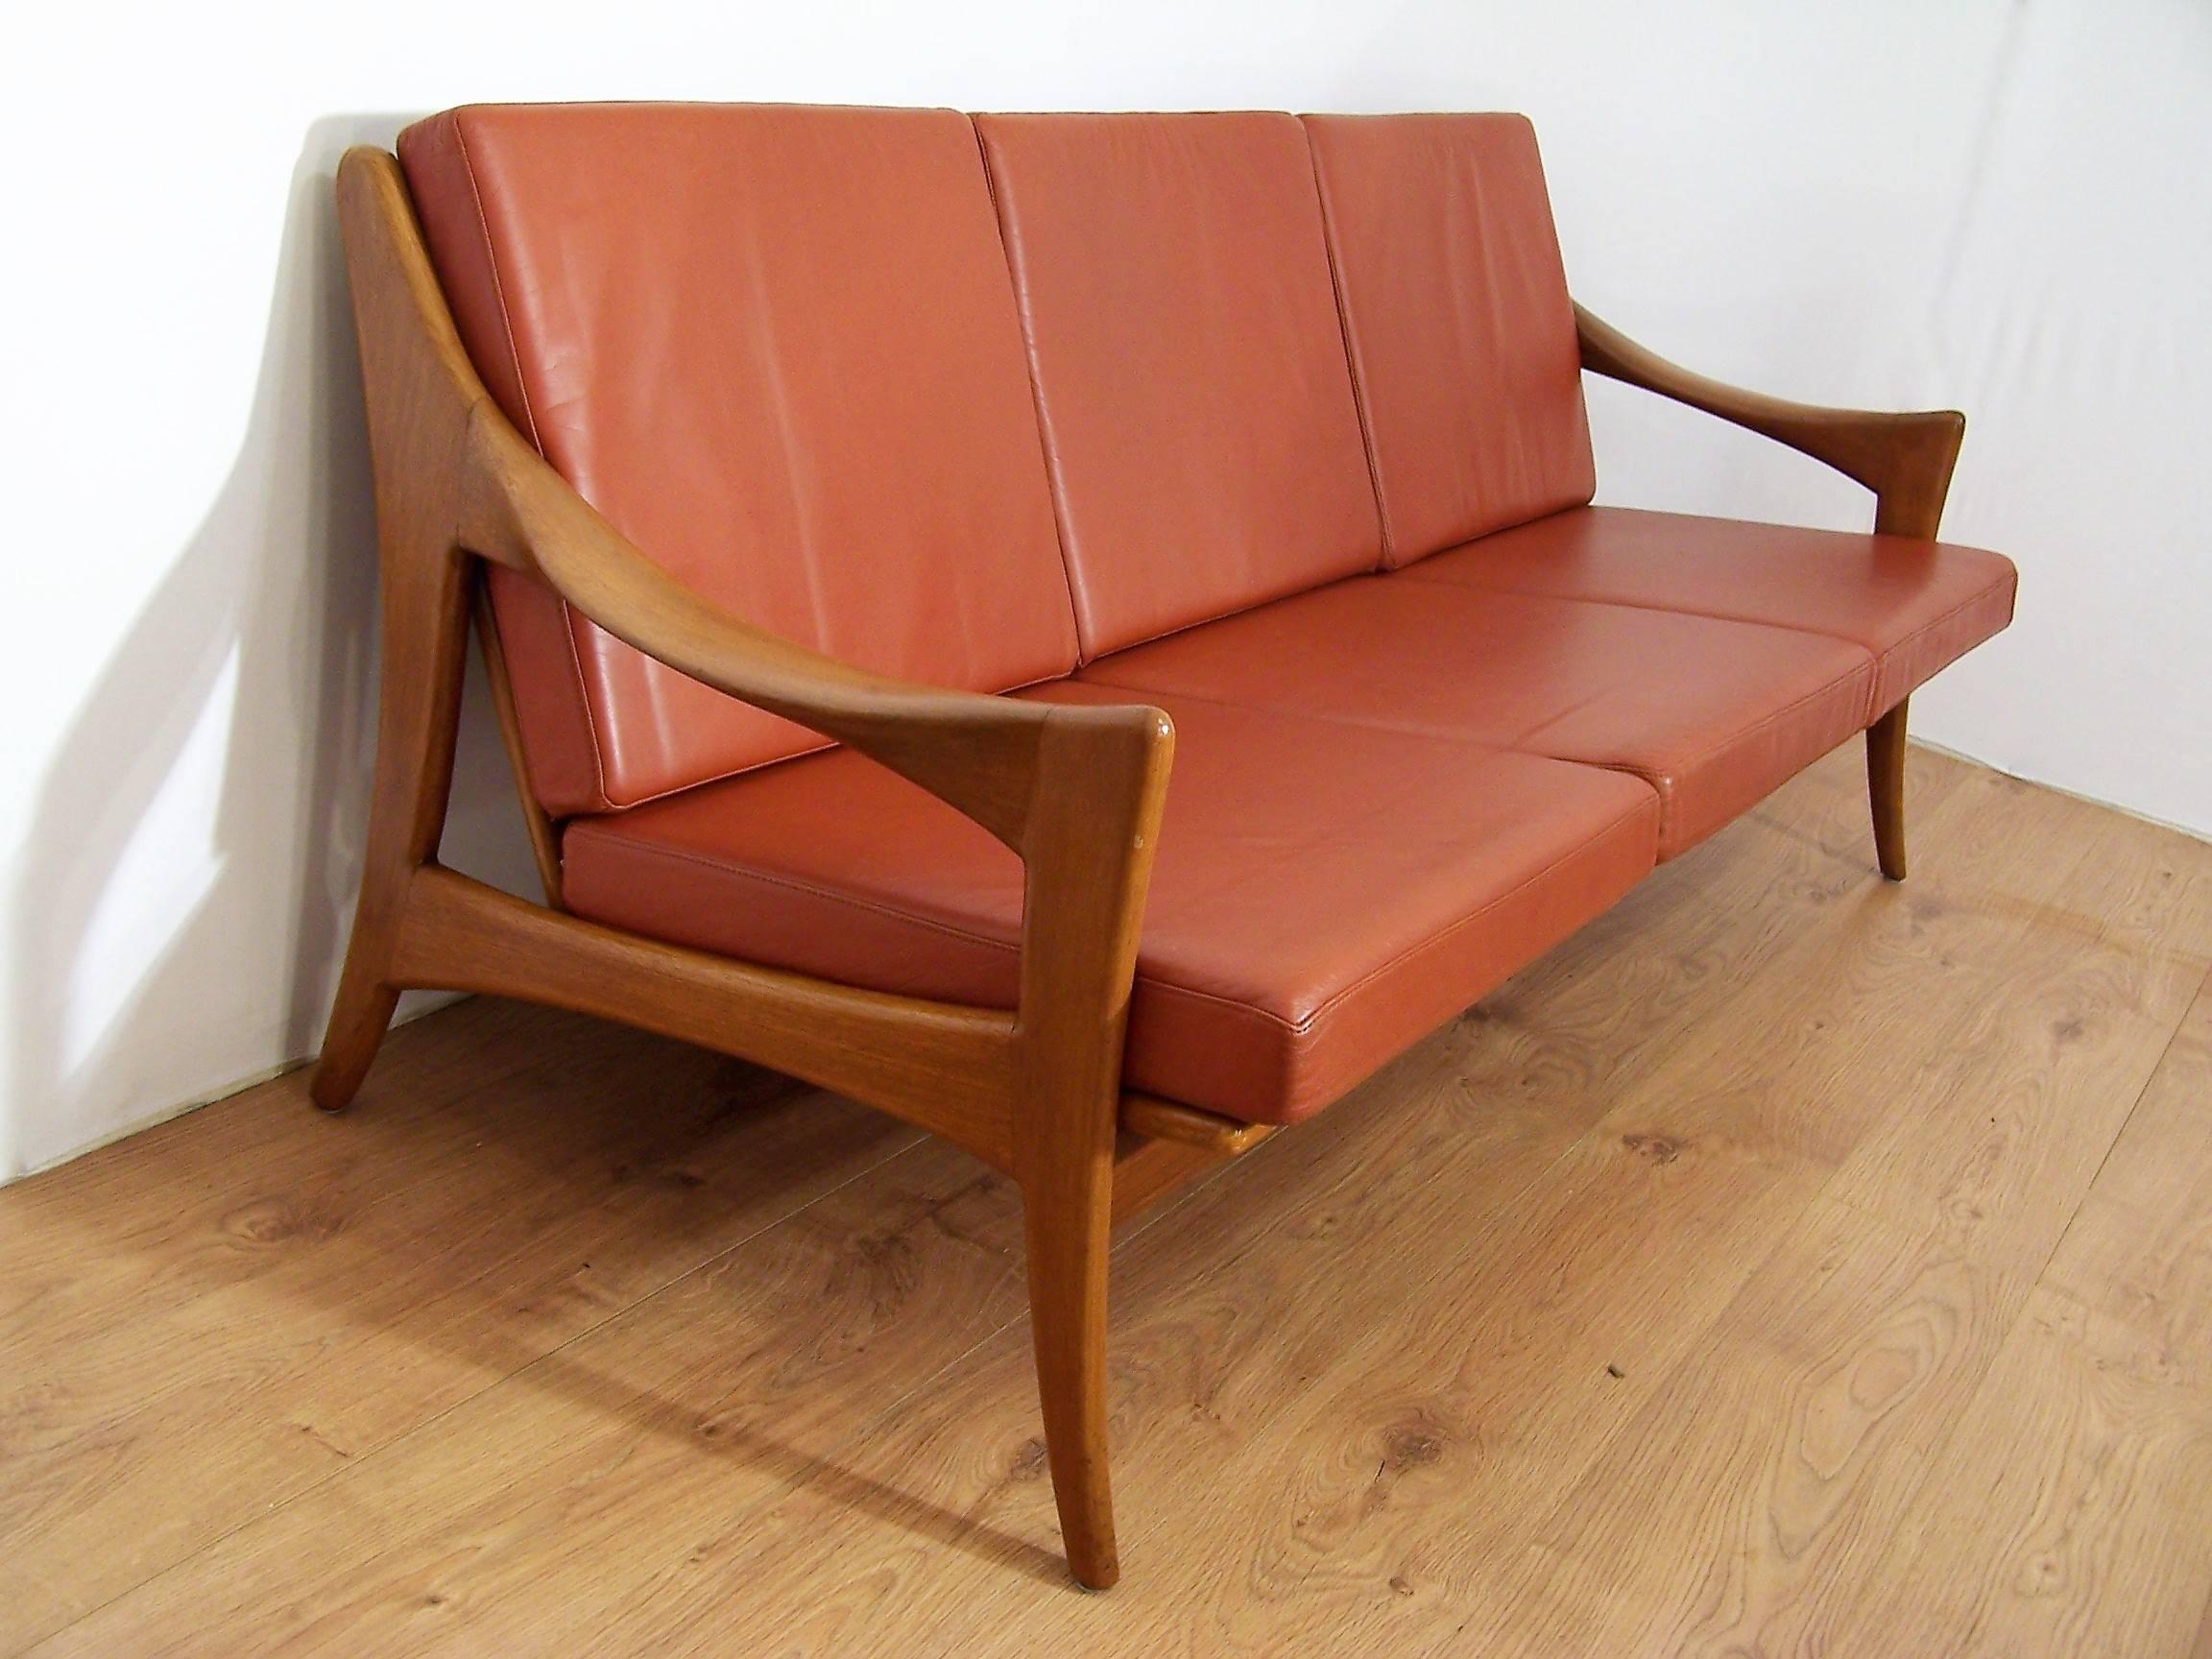 This three-seat sofa in Scandinavian style was produced in the 1950s or 1960s by the Dutch brand De Ster Gelderland. It is made from rounded teak, with cushions upholstered in red-tawny colored leather.